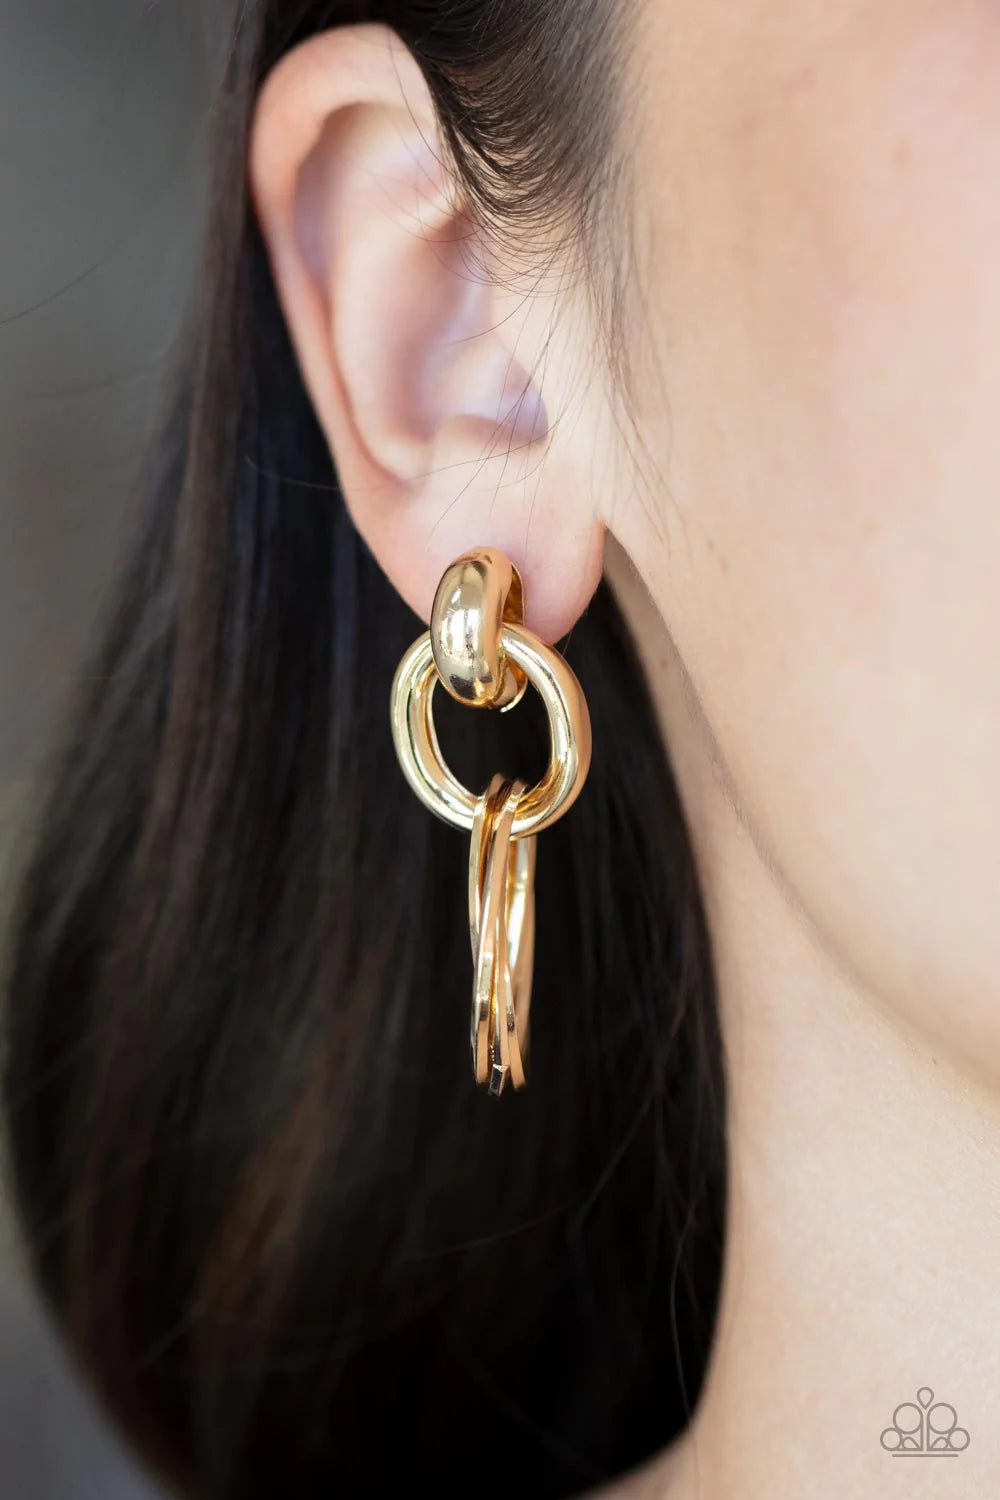 Paparazzi Accessories Dynamically Linked Glistening gold hoops are threaded through a bold gold fitting, adding a timeless twist to the dynamic display. Earring attaches to a standard post fitting. Sold as one pair of post earrings.